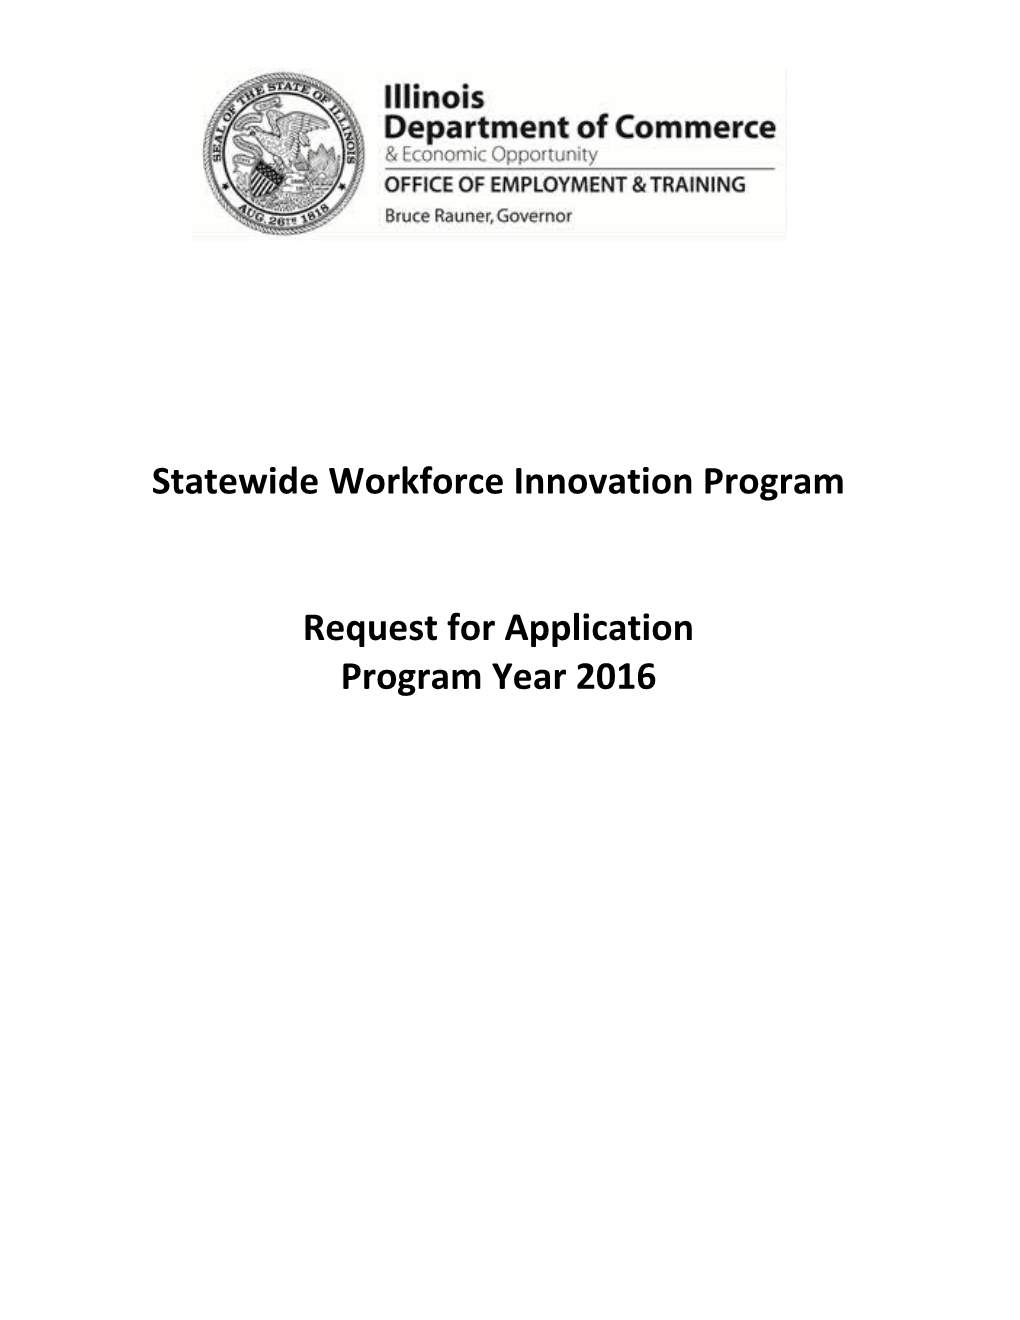 Statewide Workforce Innovation Program - Request for Application